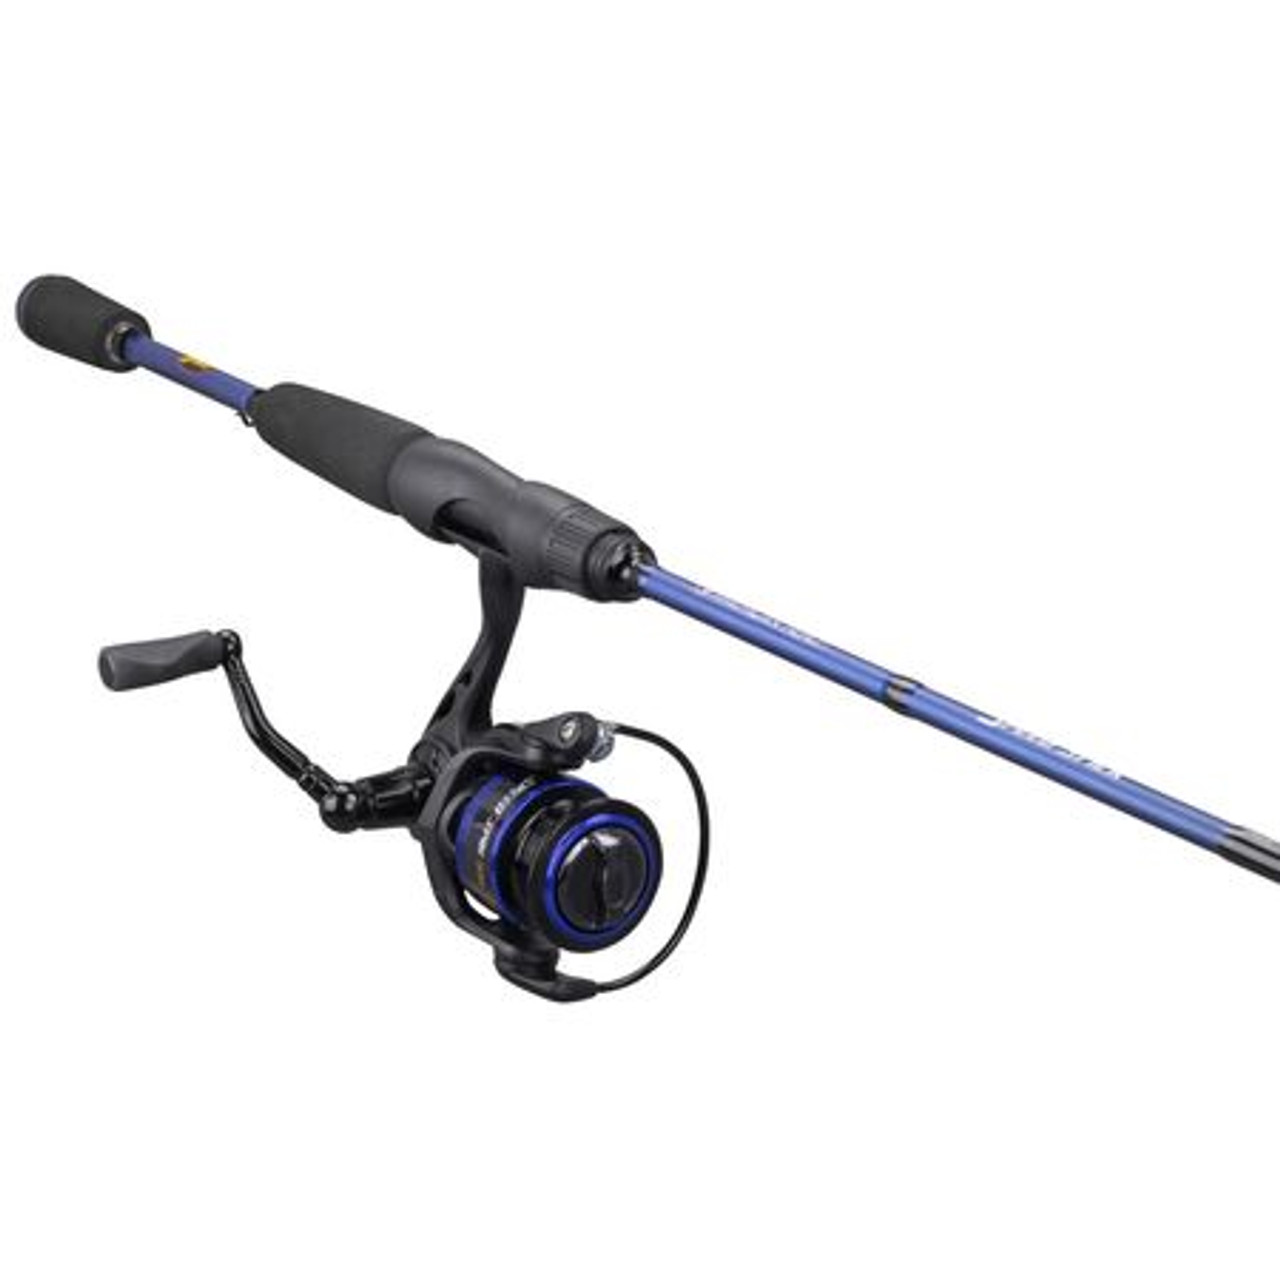 Lew's American Hero 6'6" Spinning Rod Combo